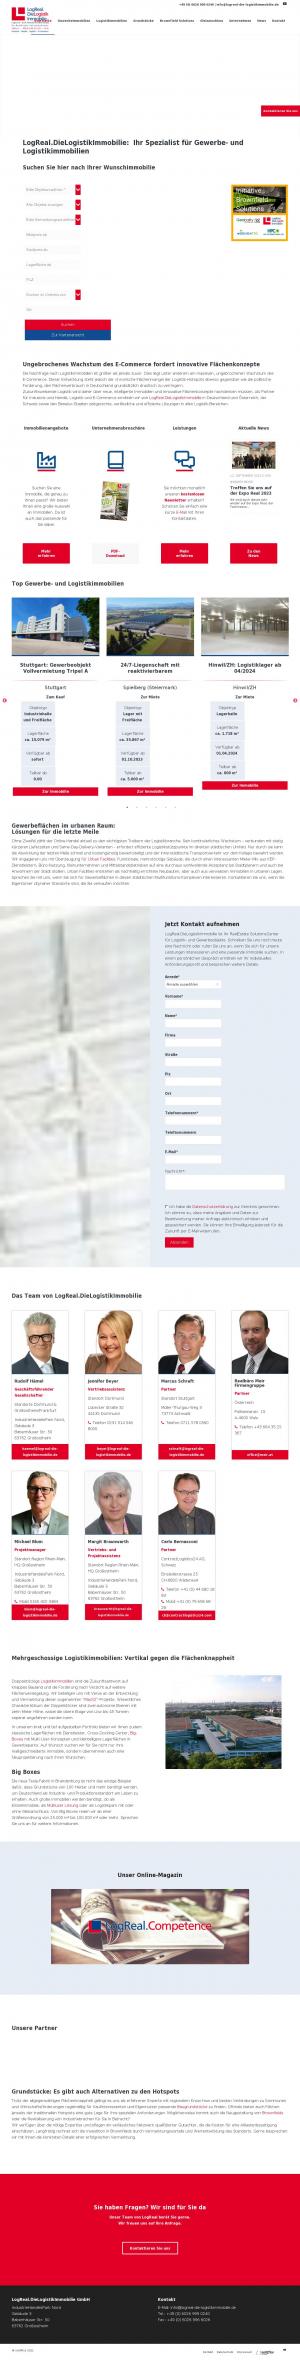 www.logreal-die-logistikimmobilie.com